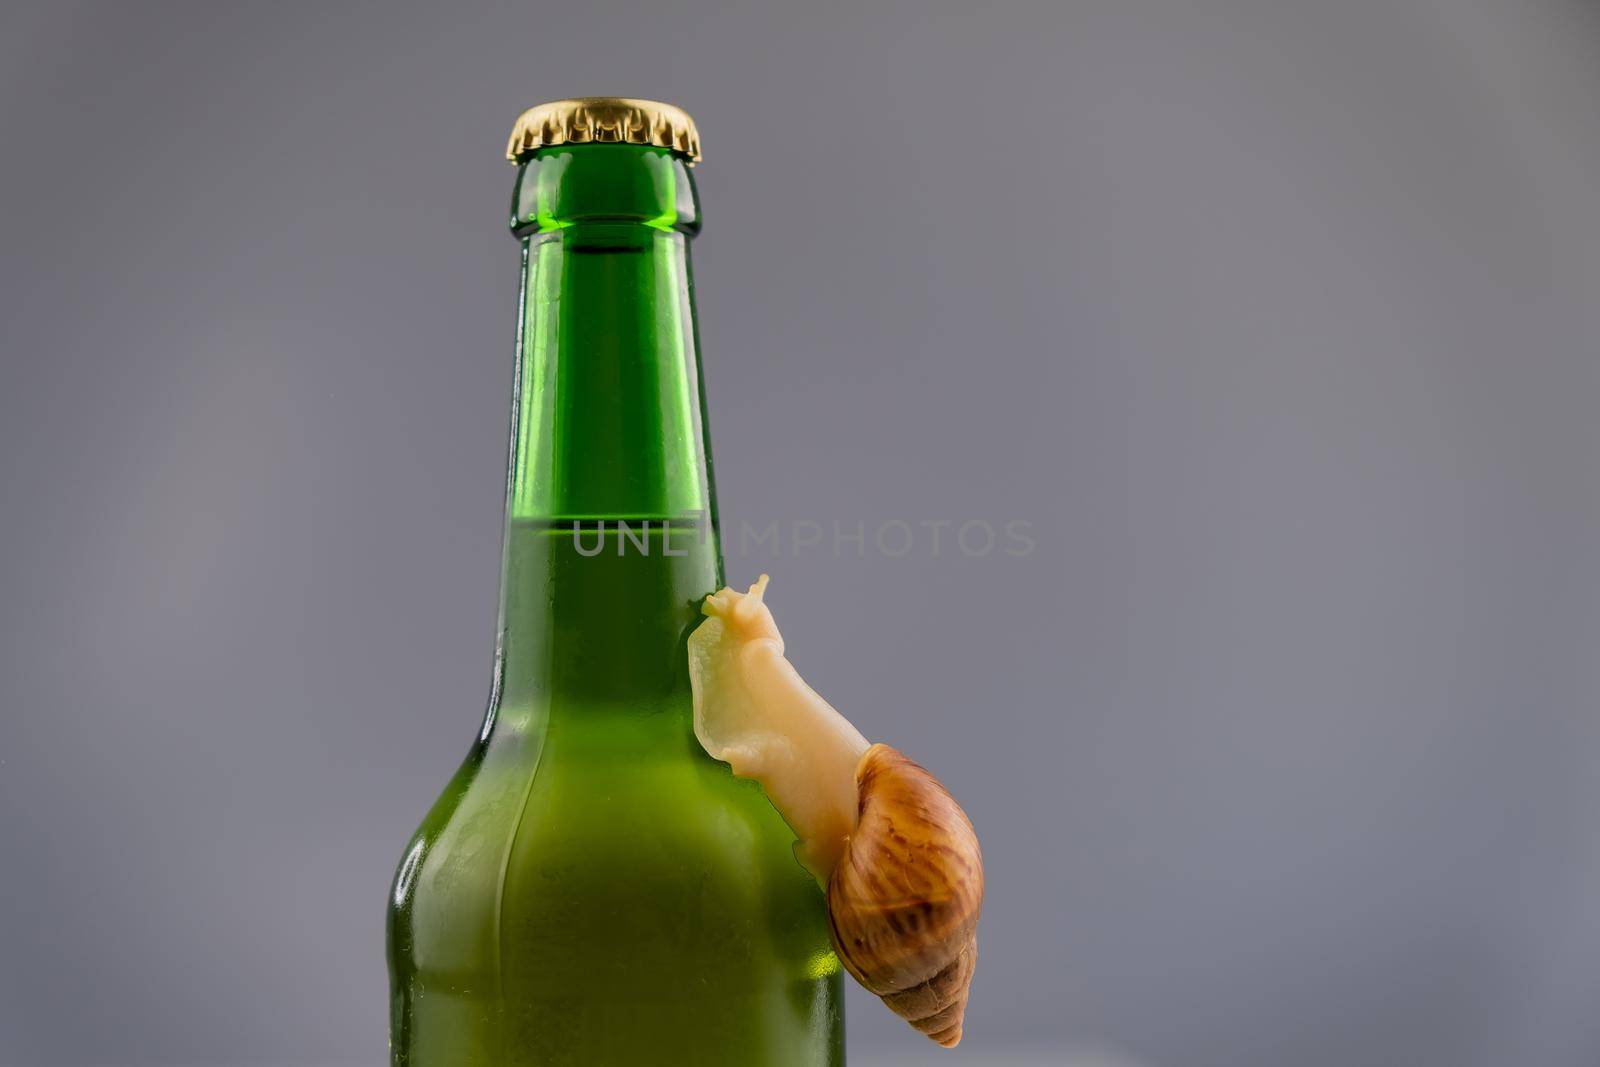 Close-up of a snail crawling on a glass bottle of beer in the studio